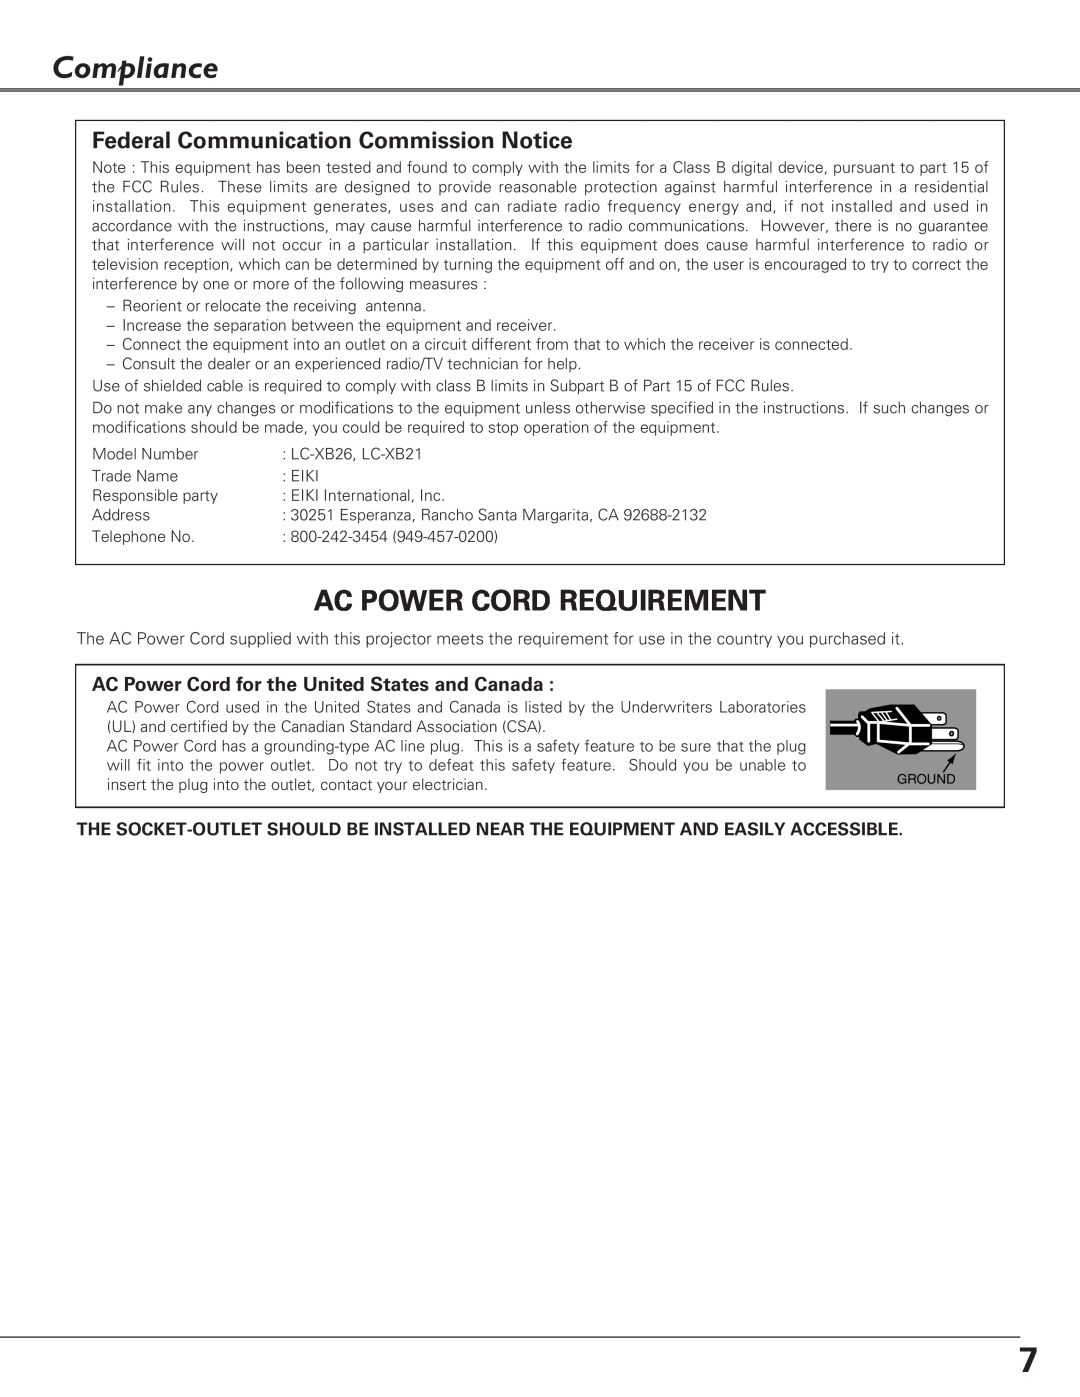 Eiki LC-XB21, LC-XB26 owner manual Compliance, Ac Power Cord Requirement, Federal Communication Commission Notice 